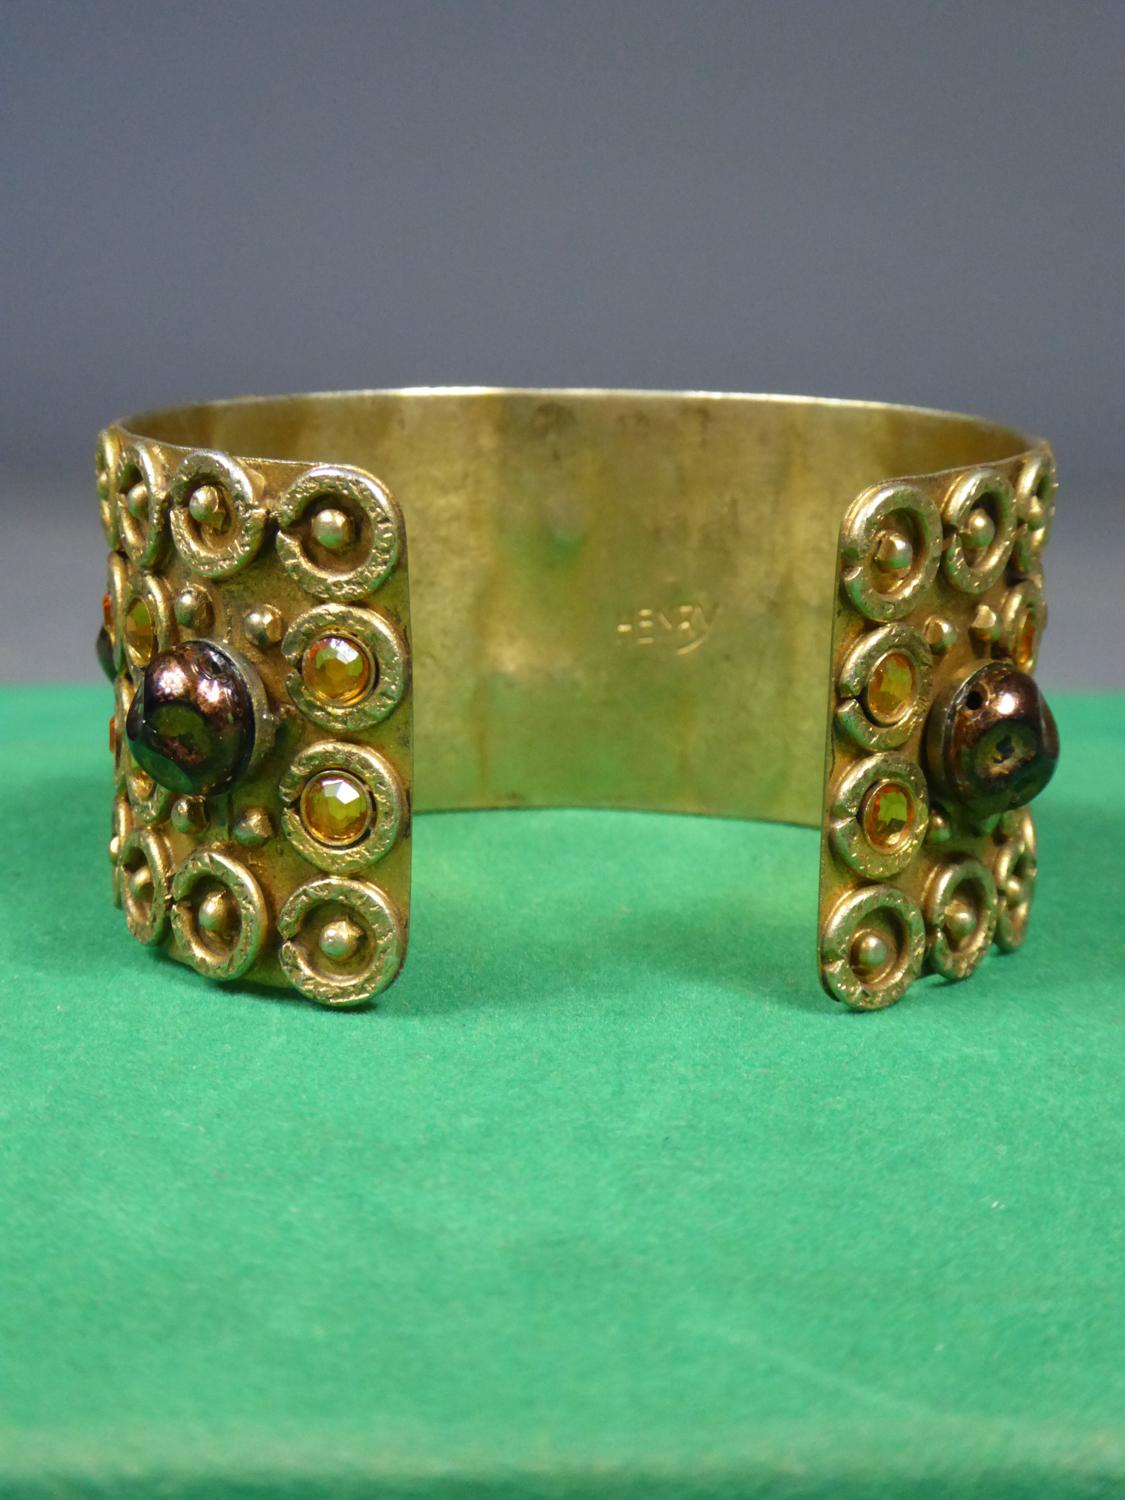 Retro A Henry Perichon Bracelet in Brass and Pearls for Haute Couture Circa 1960 For Sale